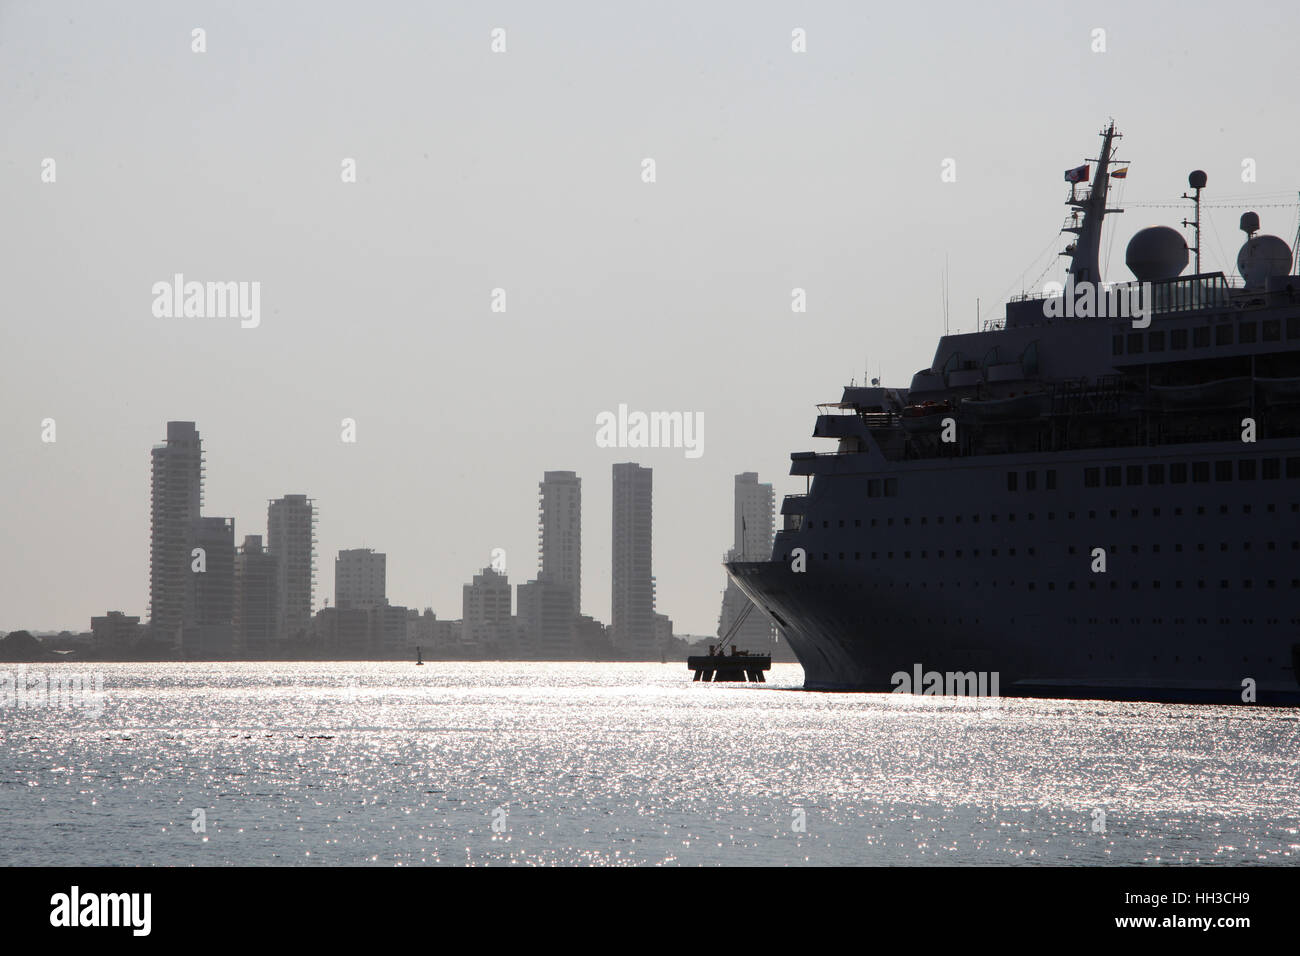 Cruise ship docked in front of the skyline of Cartagena, Colombia. Stock Photo